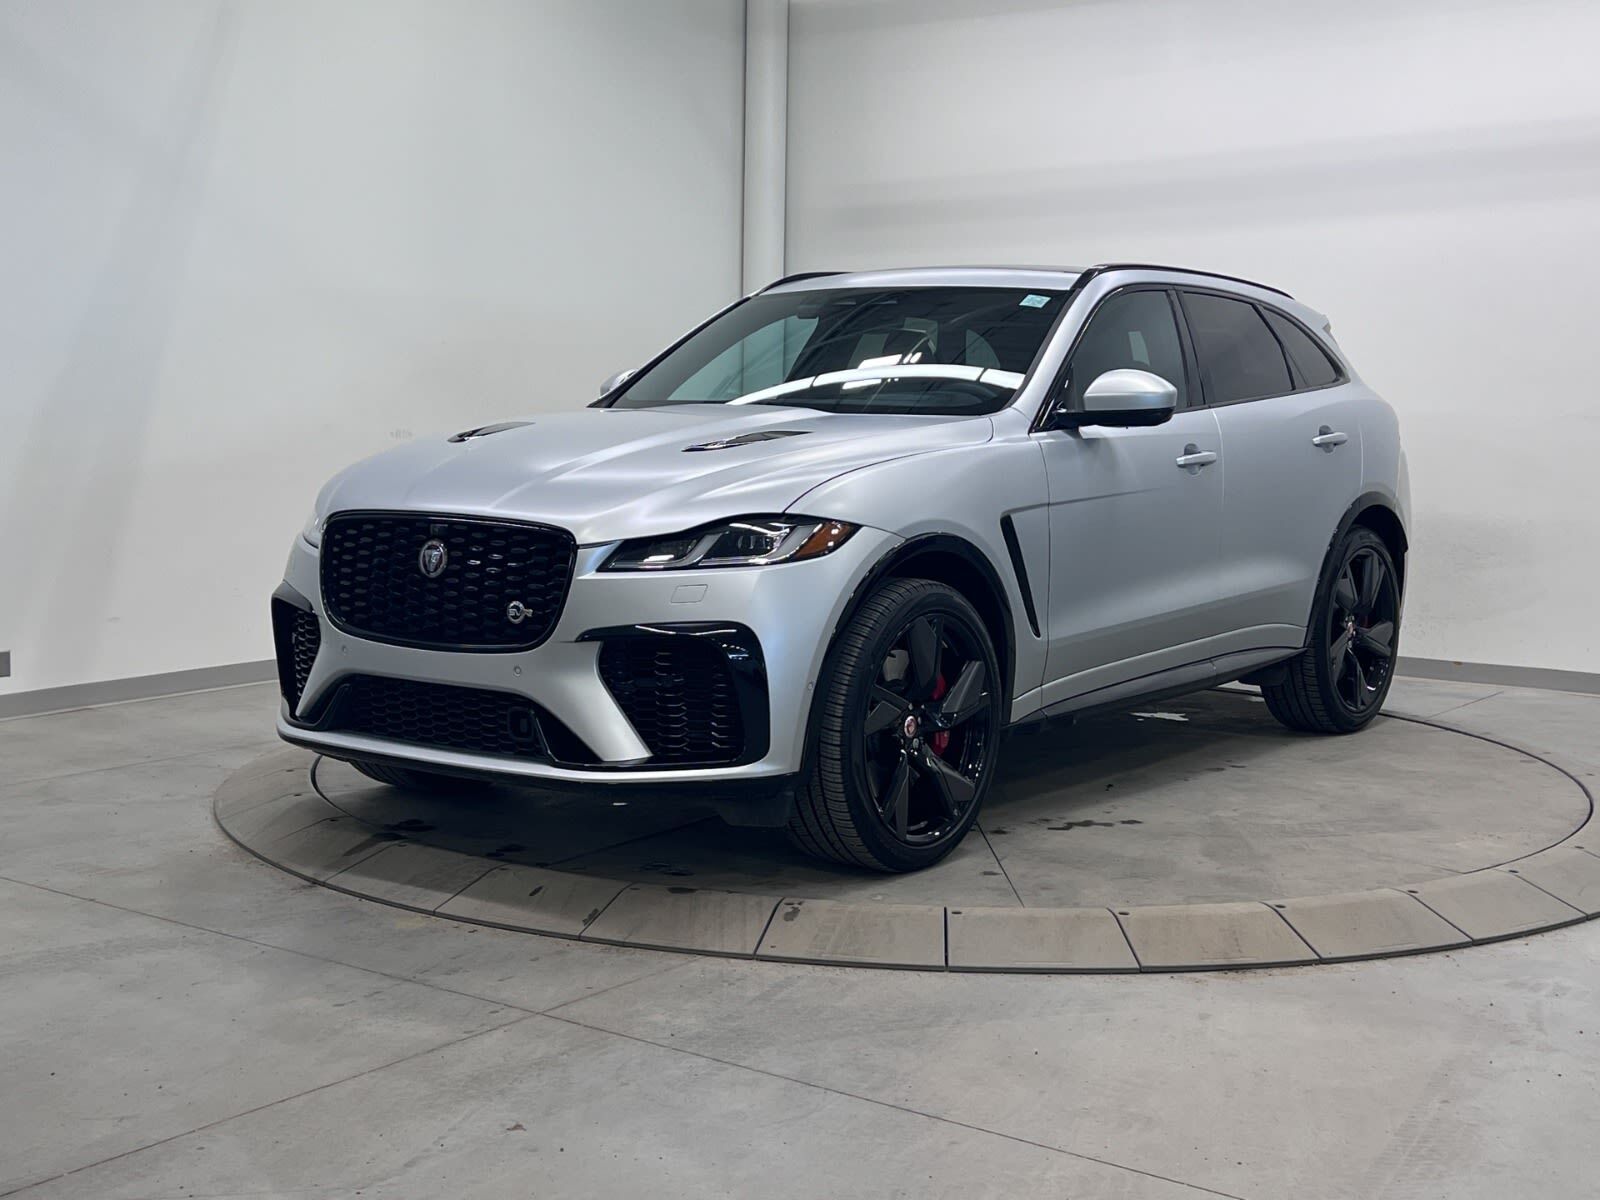 2023 Jaguar F-Pace CERTIFIED PRE OWNED RATES AS LOW AS 5.99%